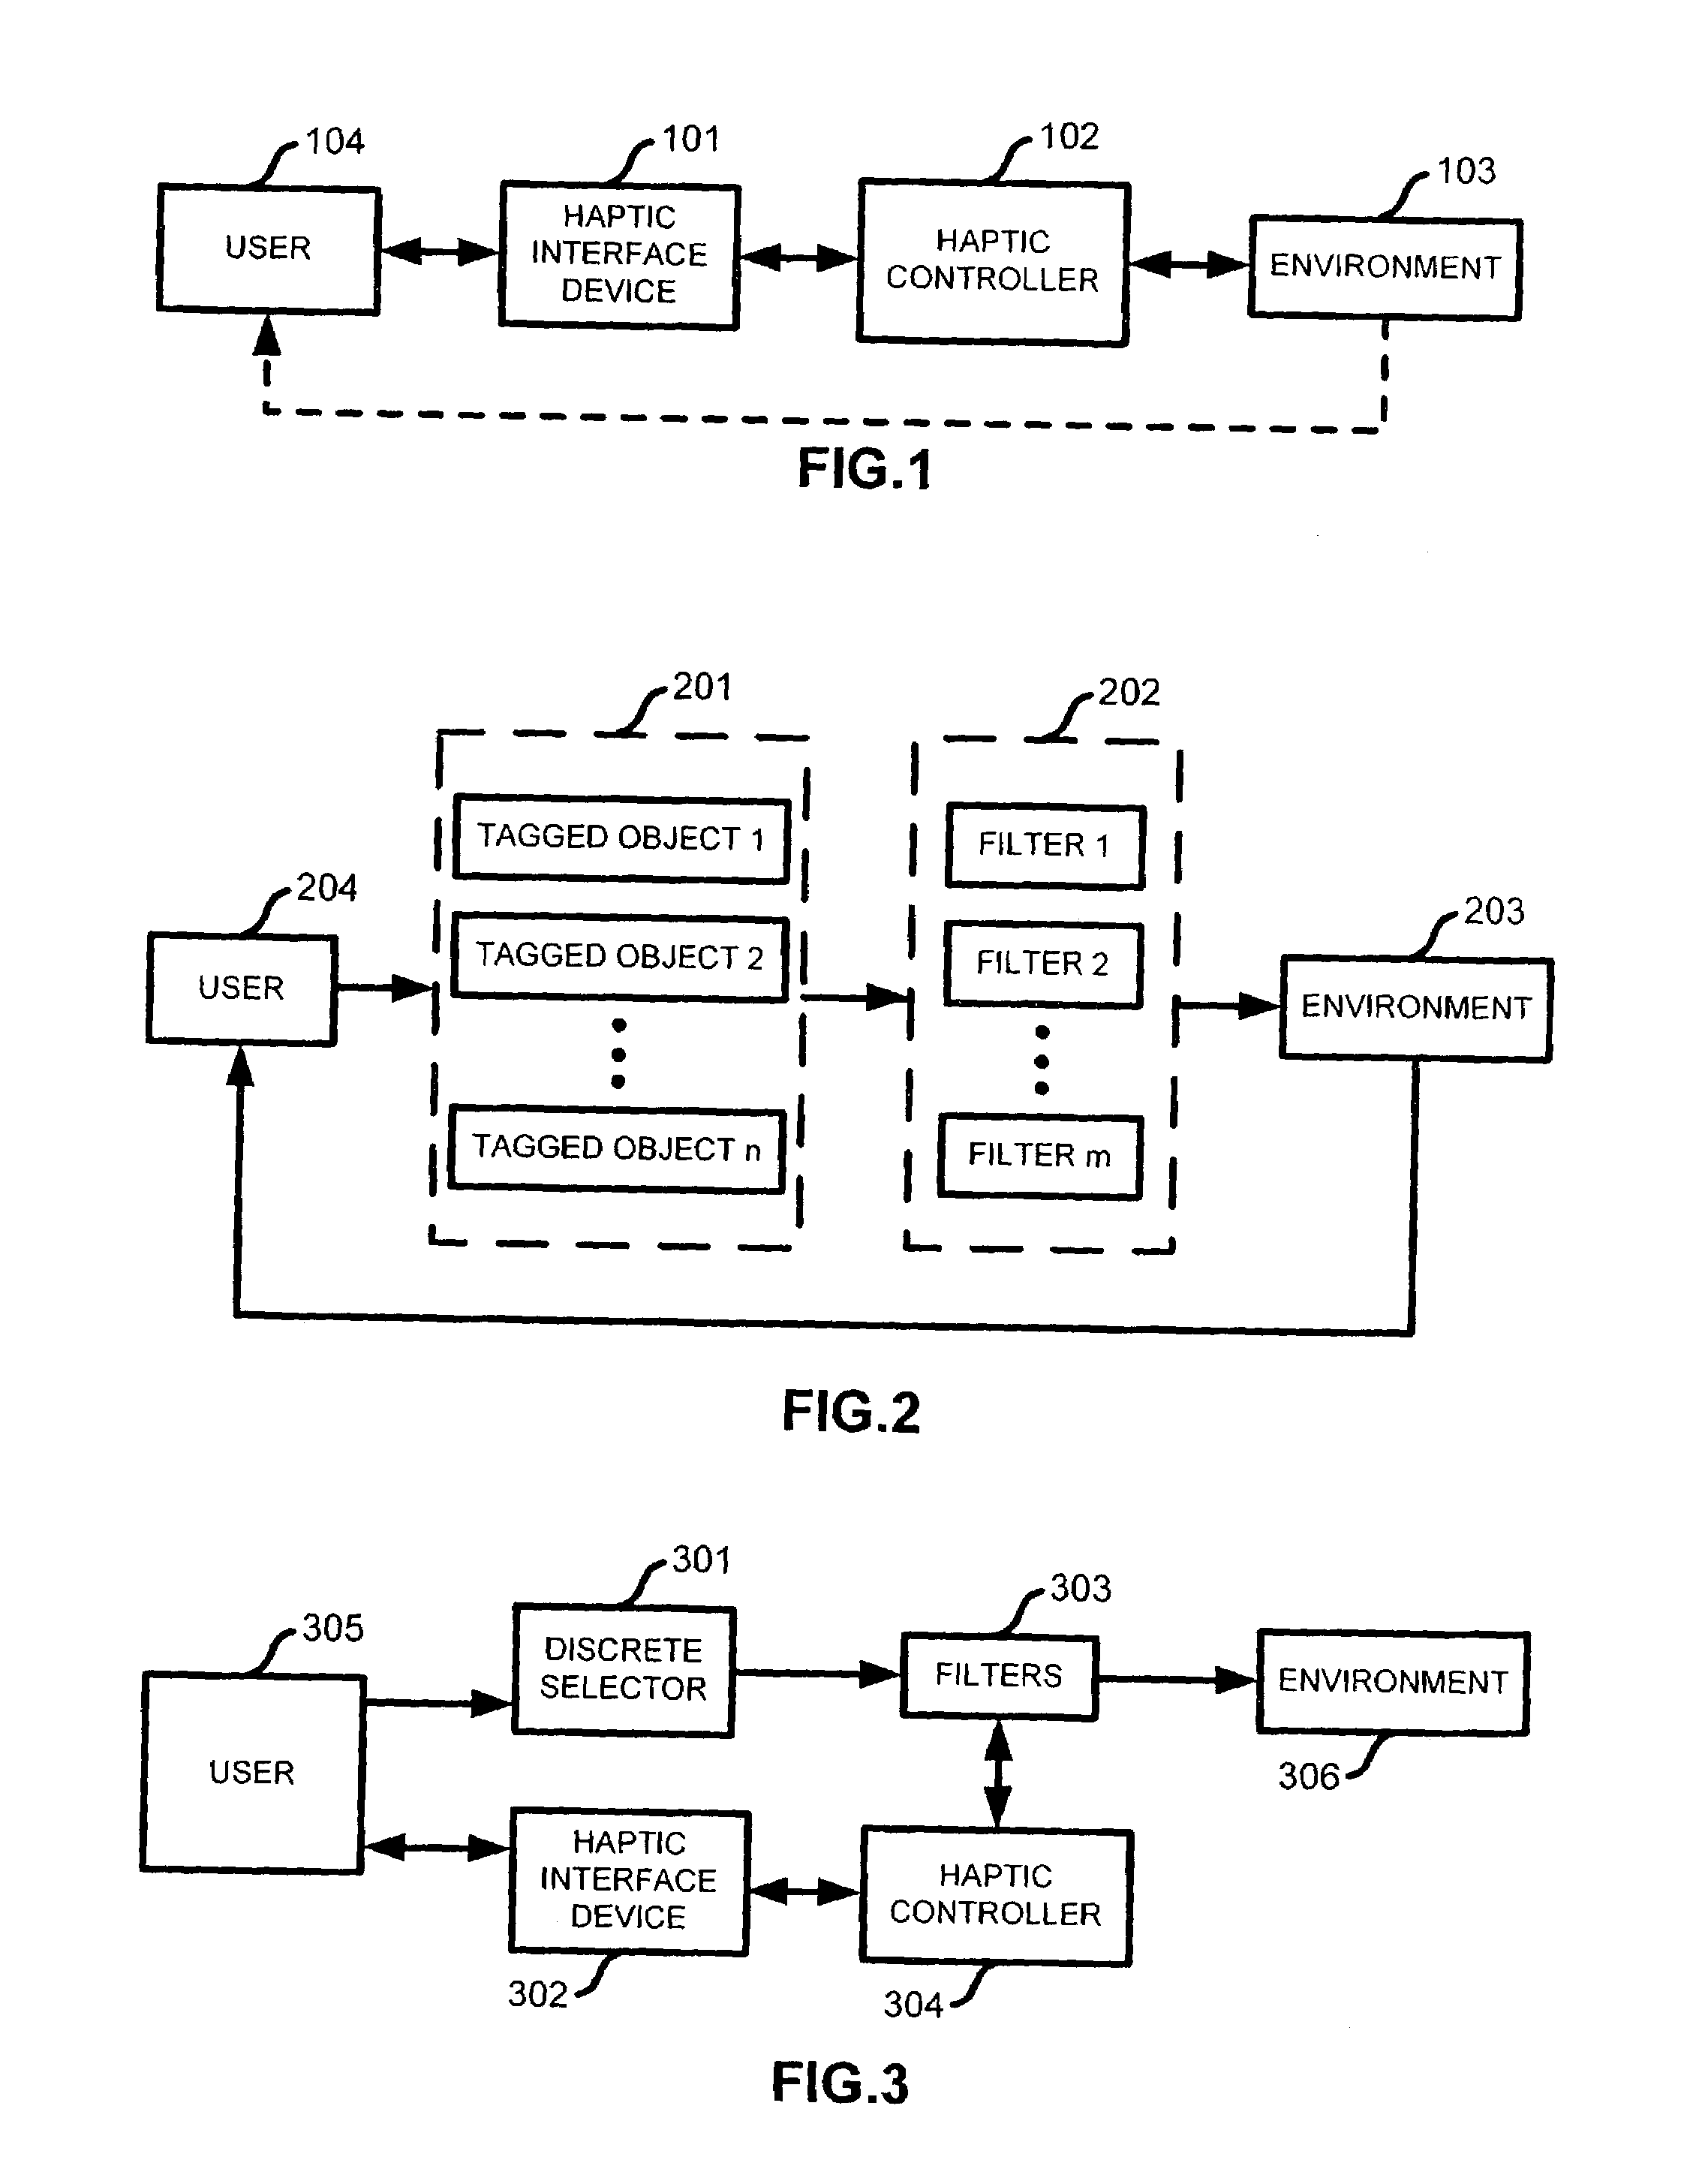 Manual interface combining continuous and discrete capabilities